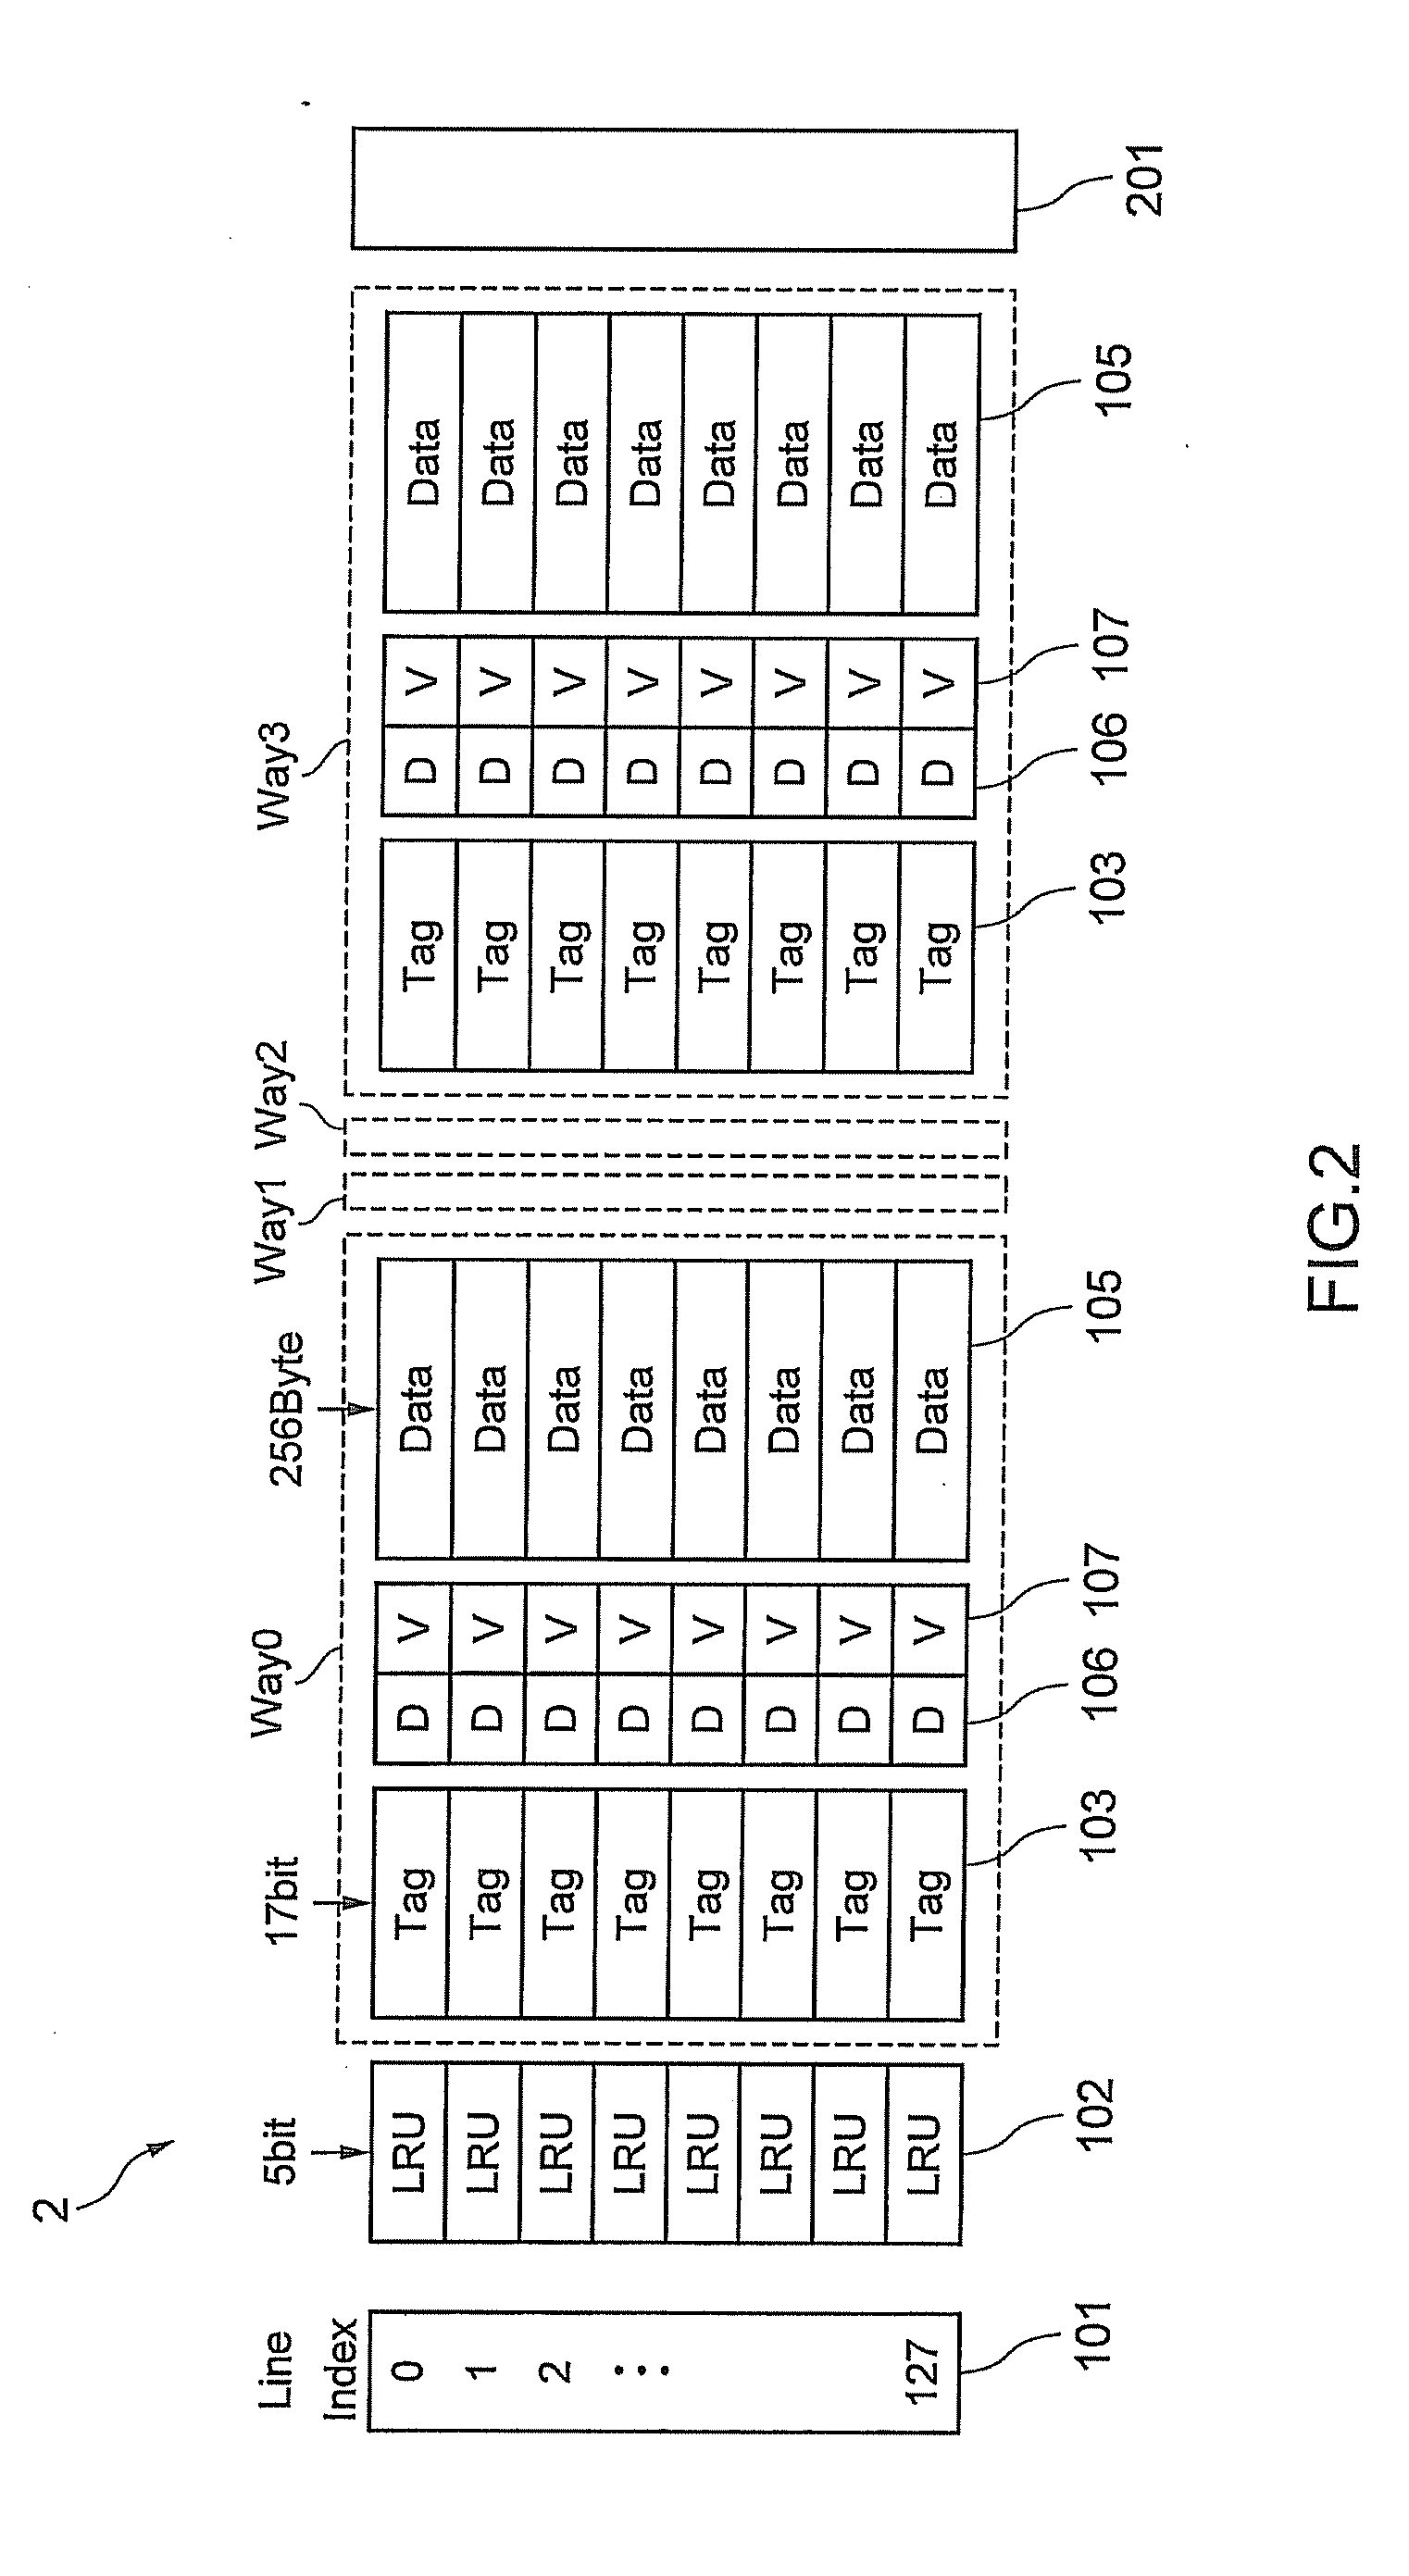 Cache memory and cache system